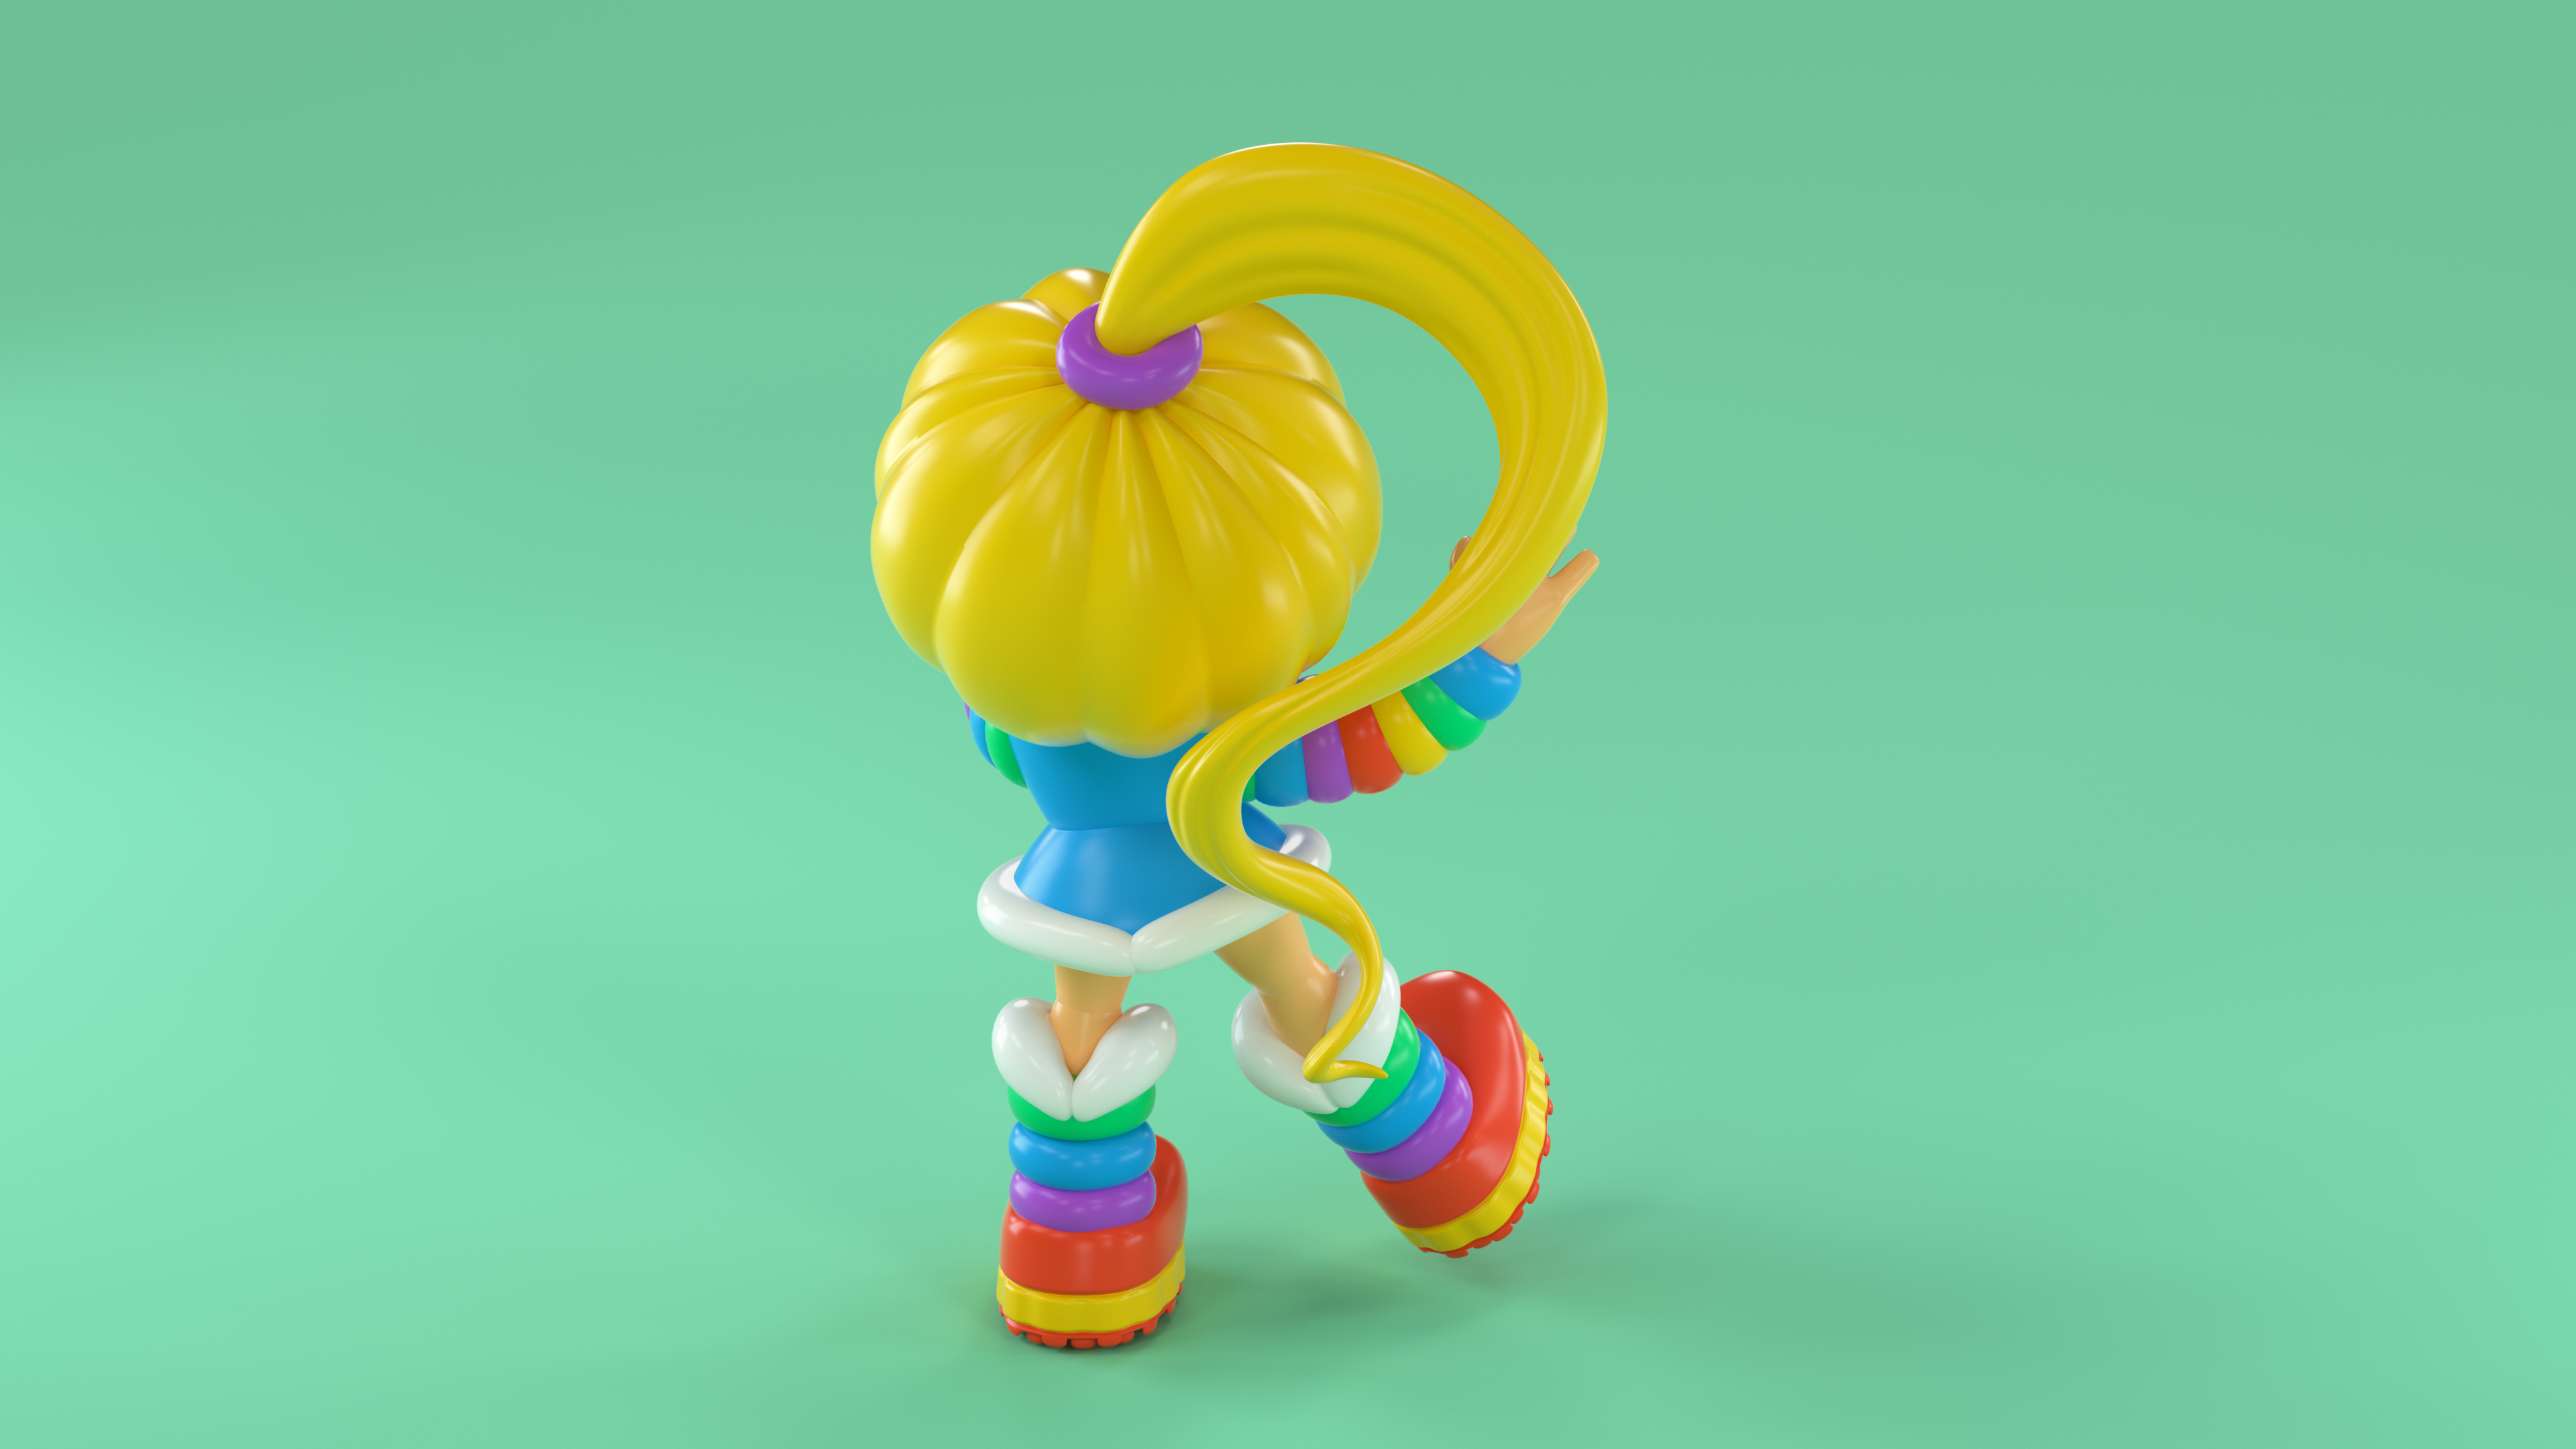 R is for Rainbow Brite by Noah Camp on Dribbble